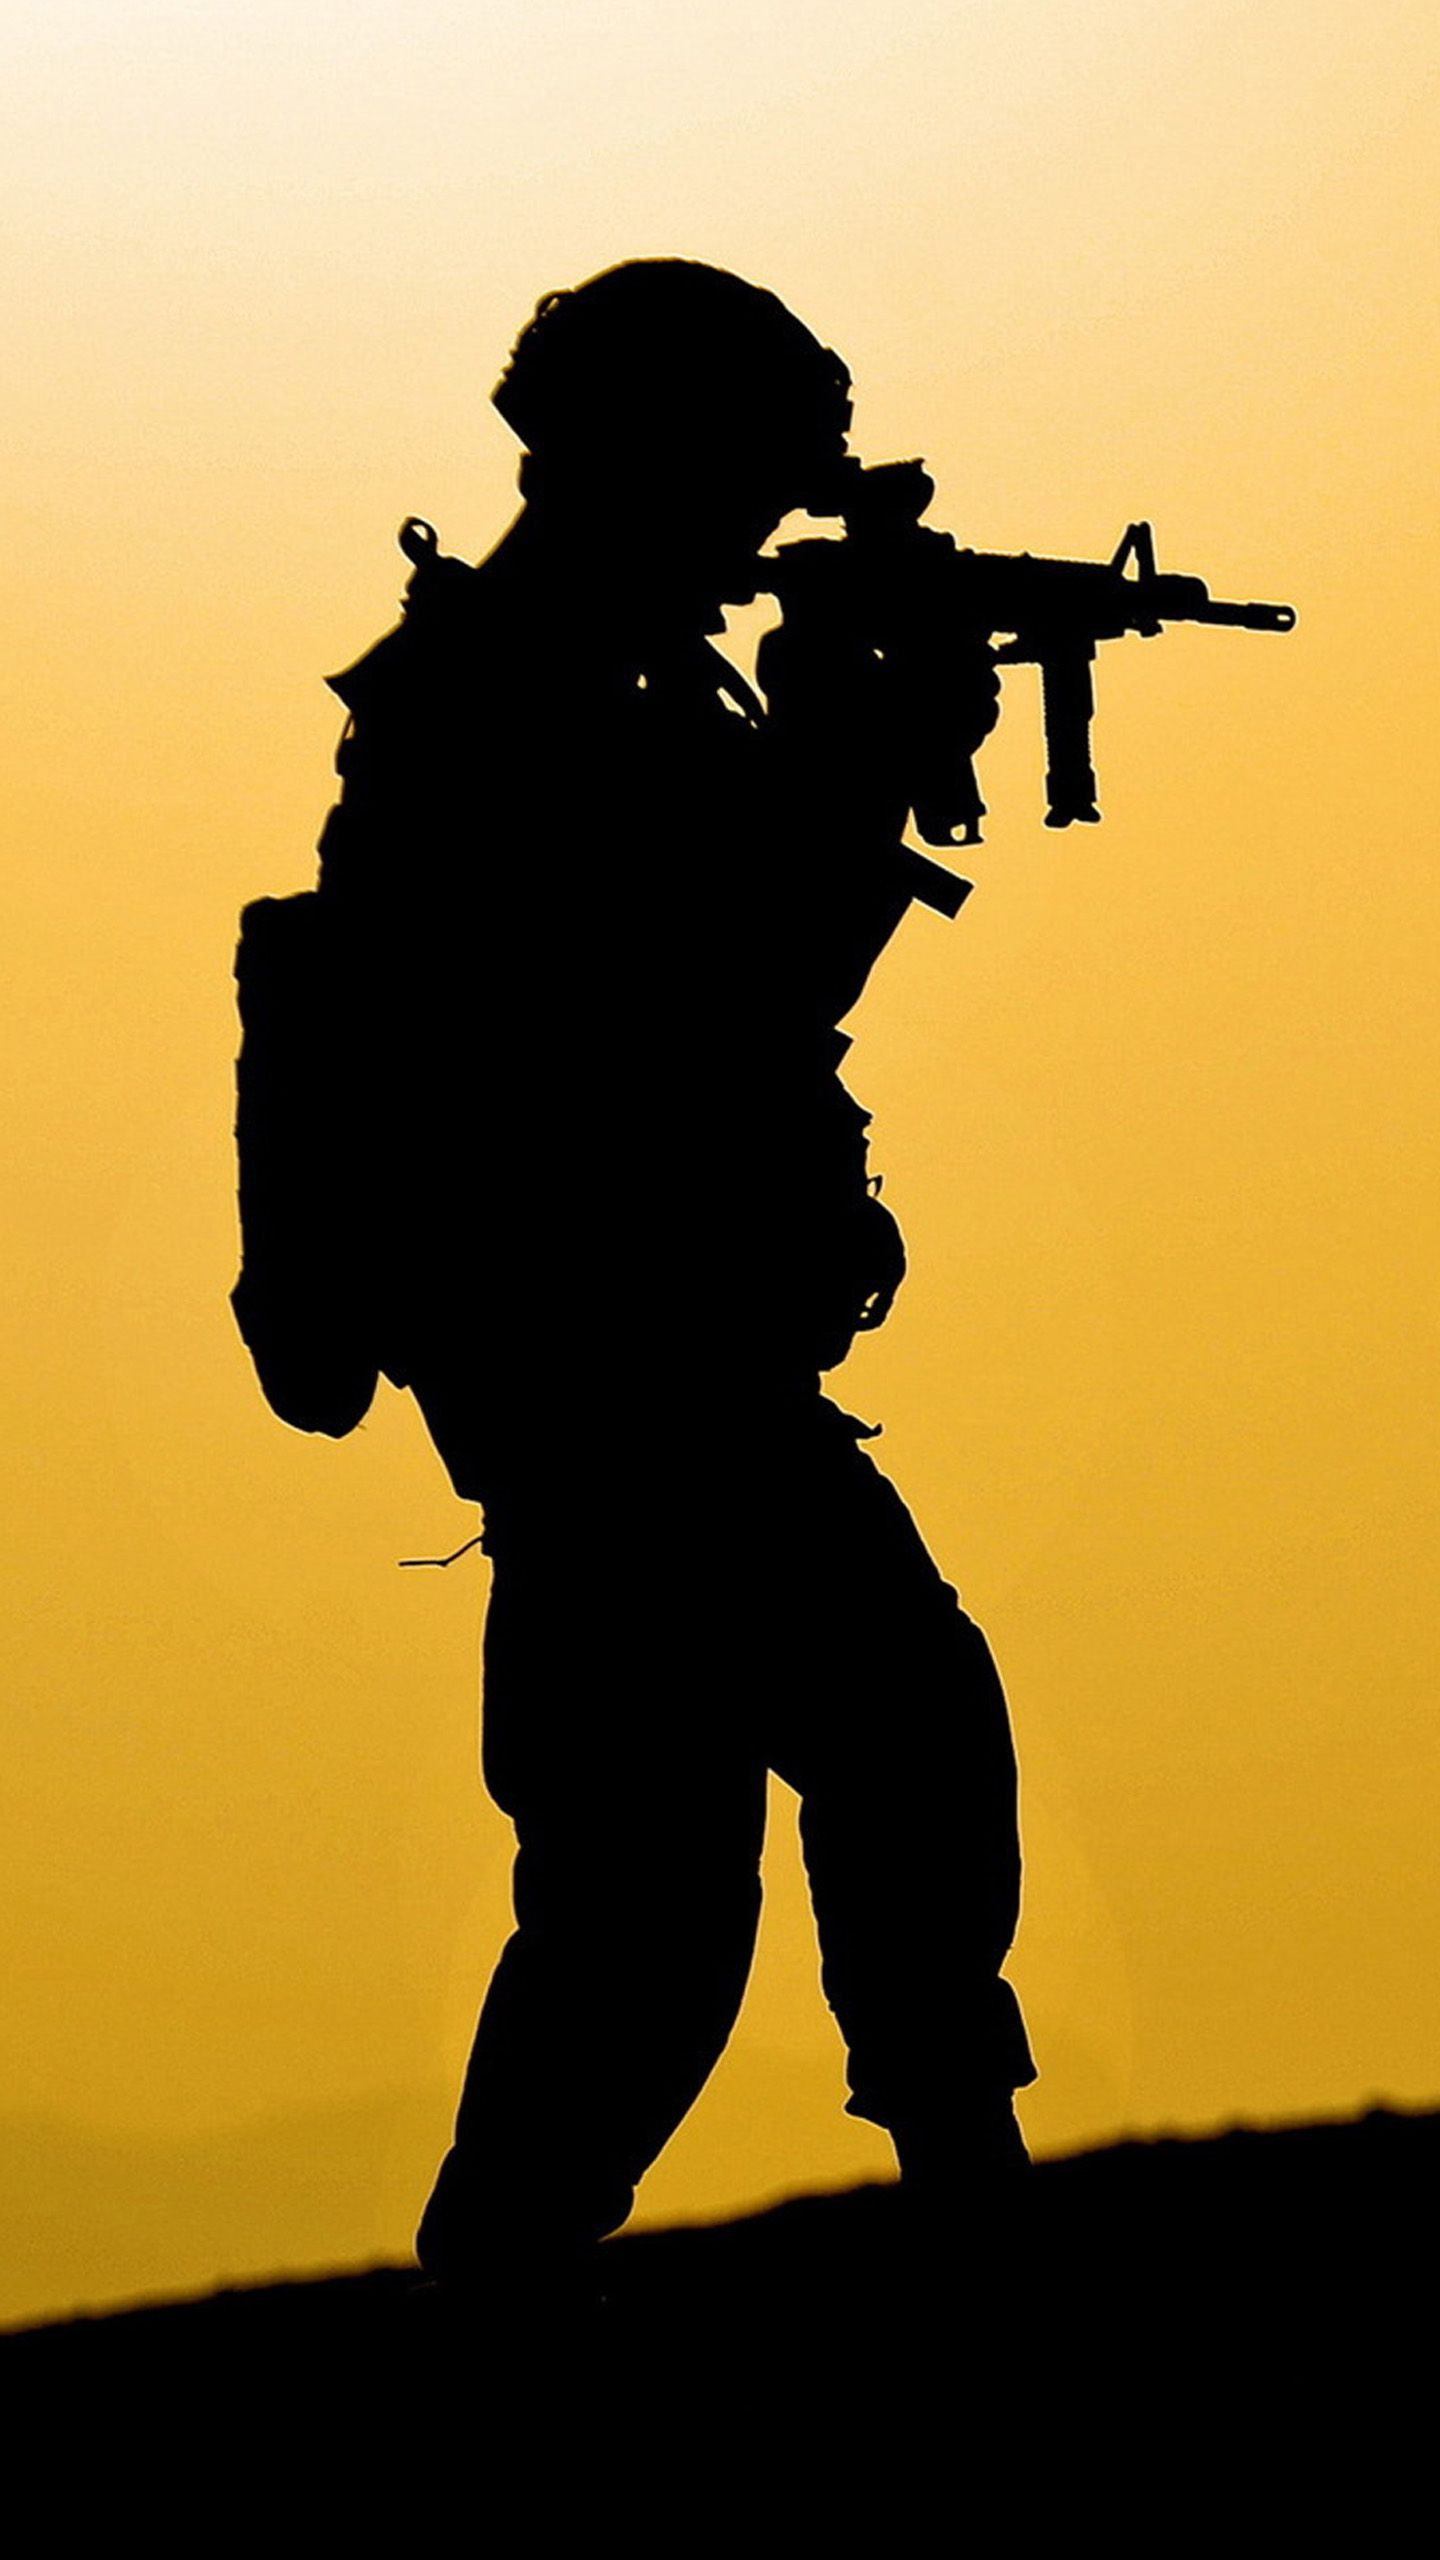 Indian Soldier Silhouette - HD Wallpaper 